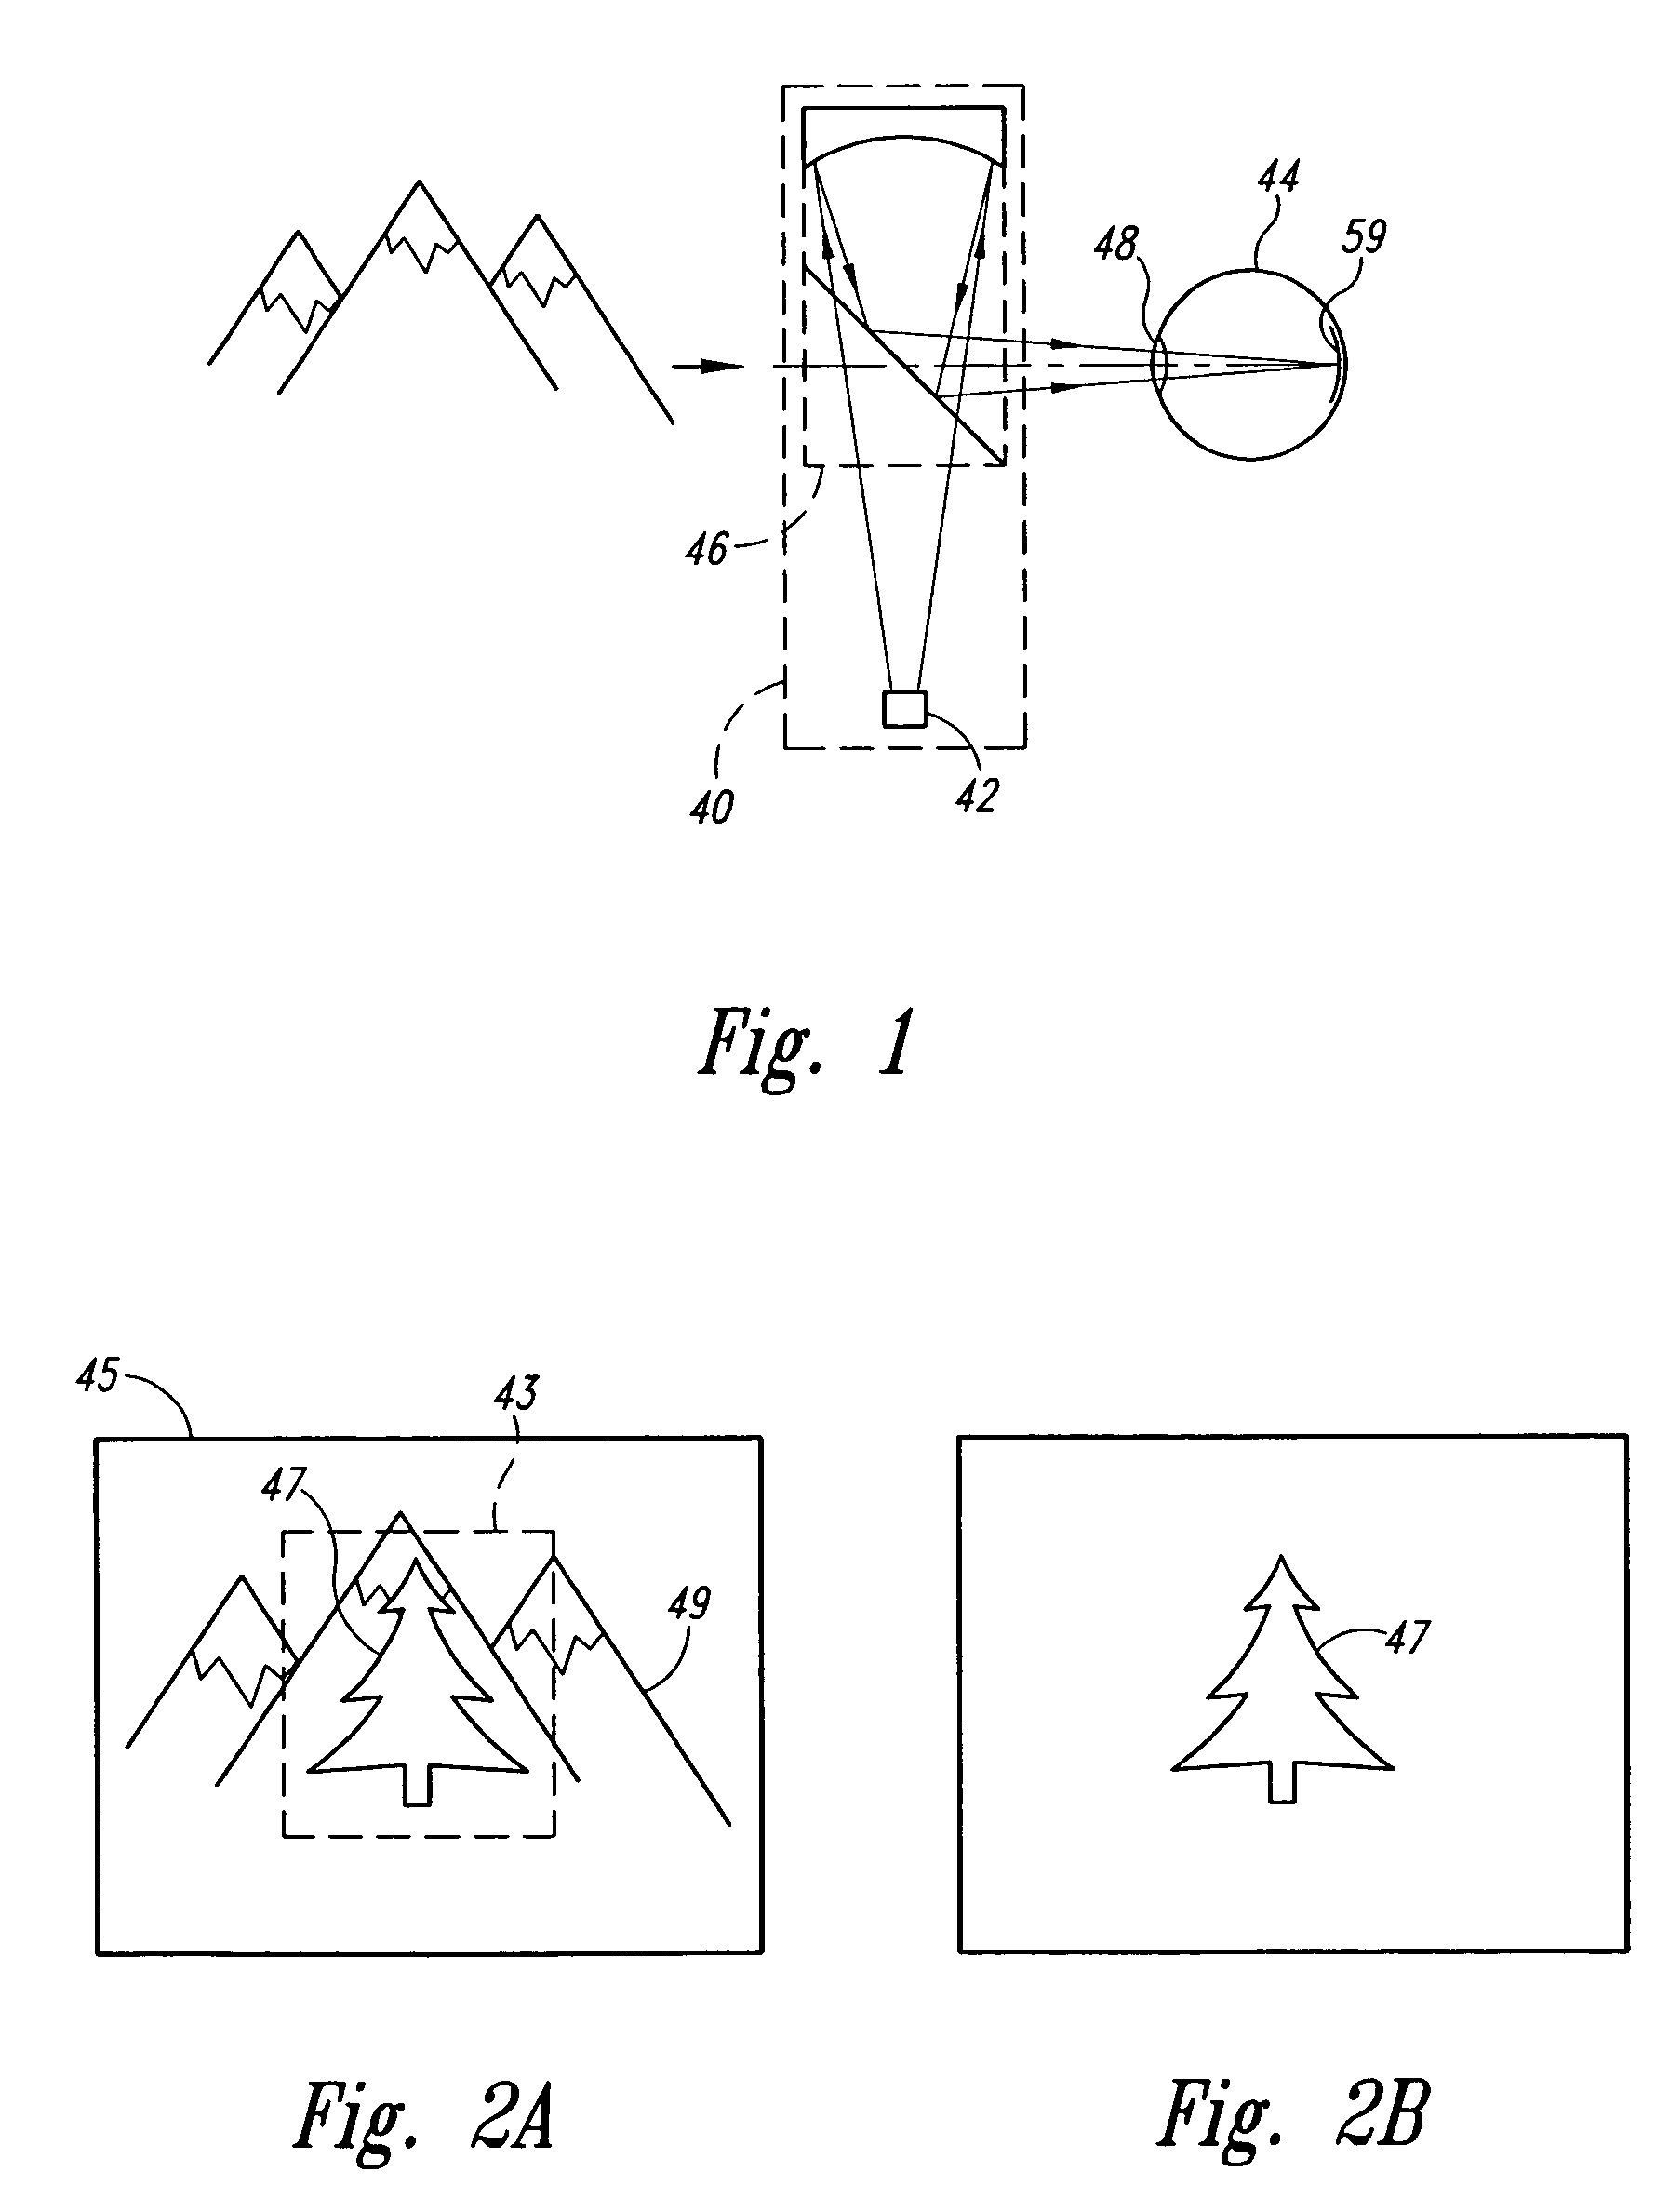 Optical scanning system with correction